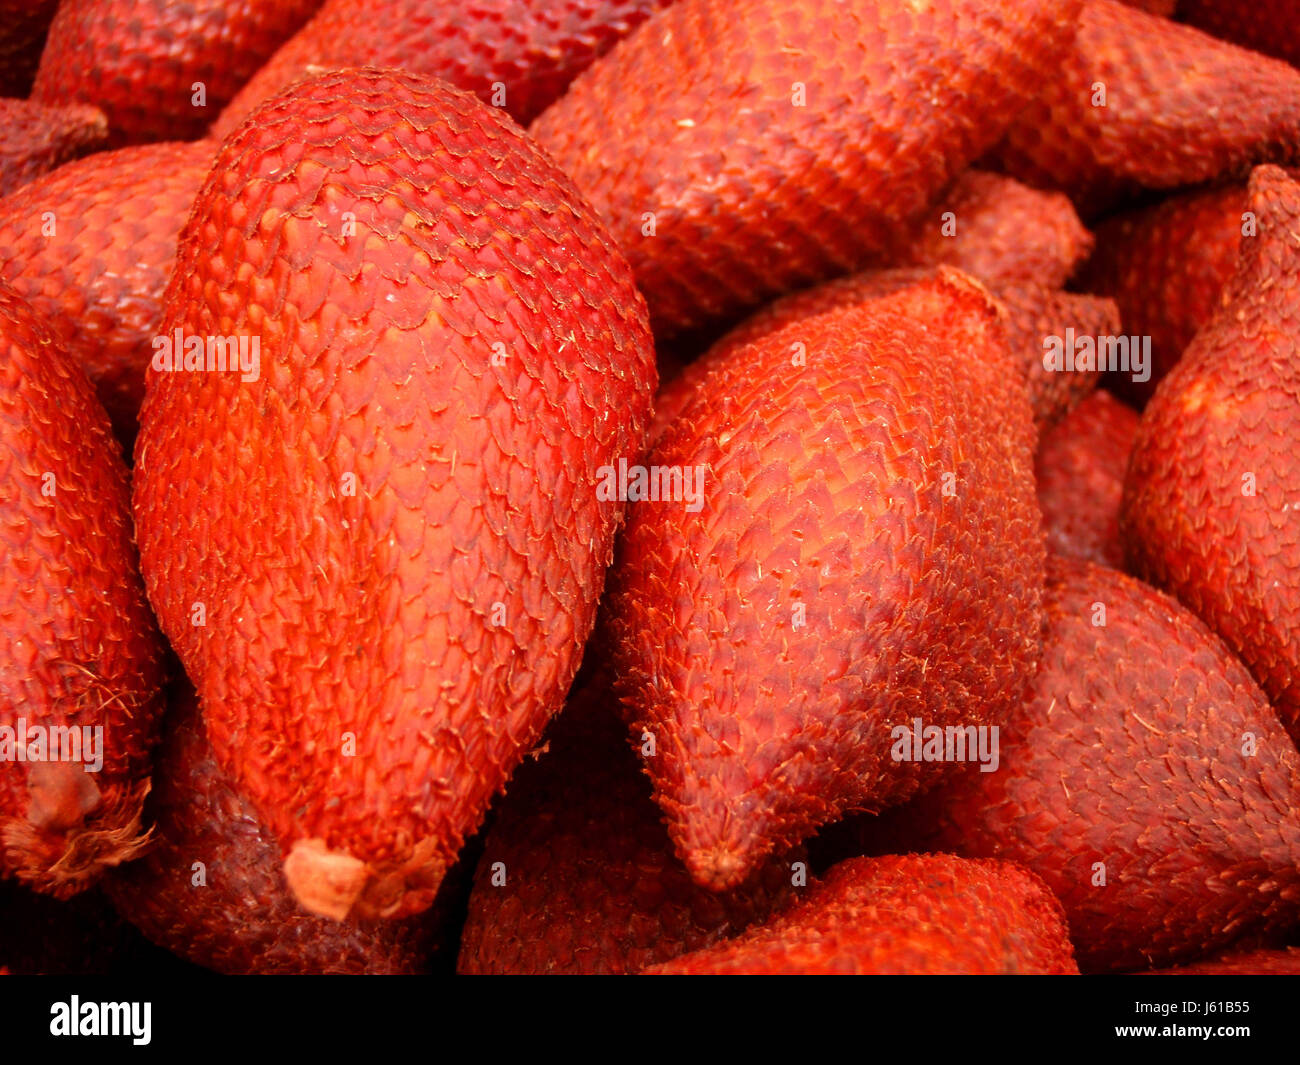 progenies fruits fruit pulp progenies fruits fruit refreshing pulp nutrition Stock Photo